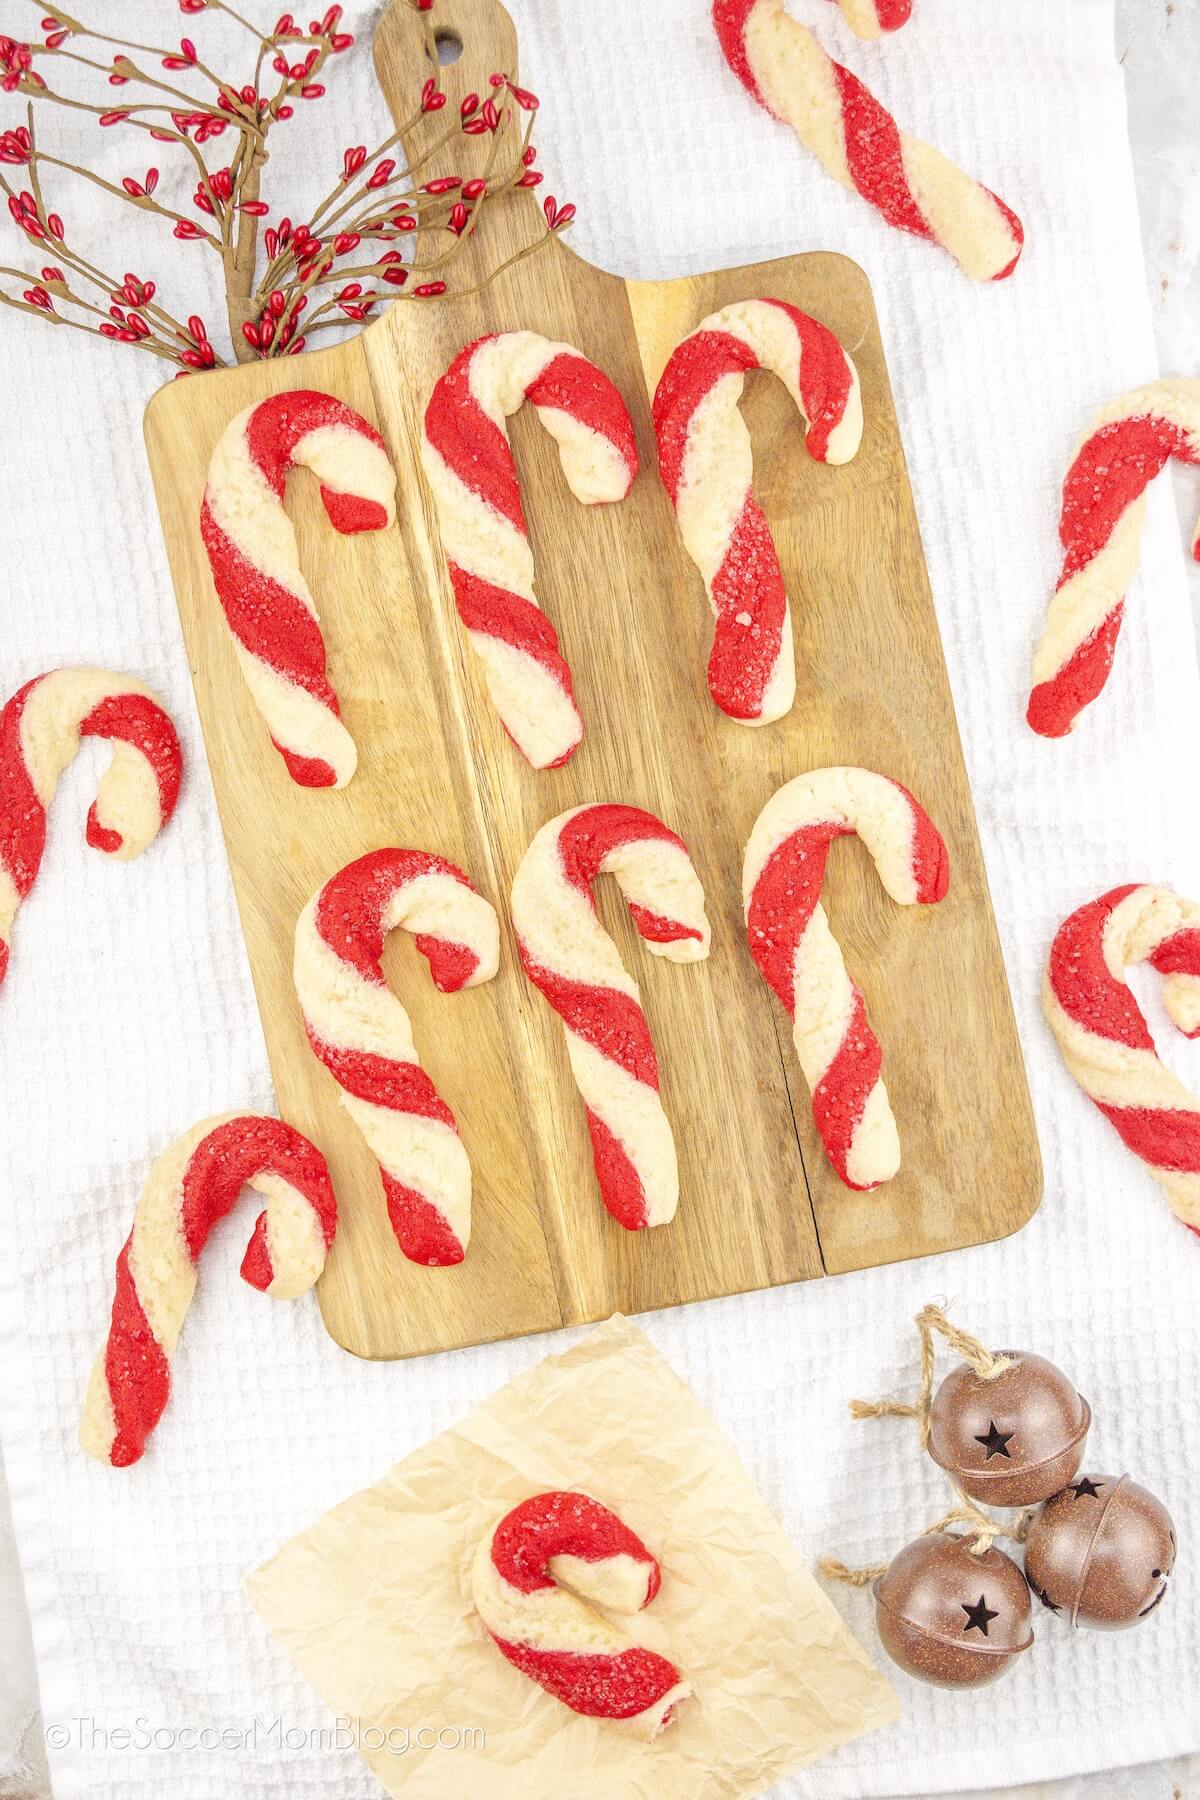 candy cane shaped sugar cookies on a wooden serving board.